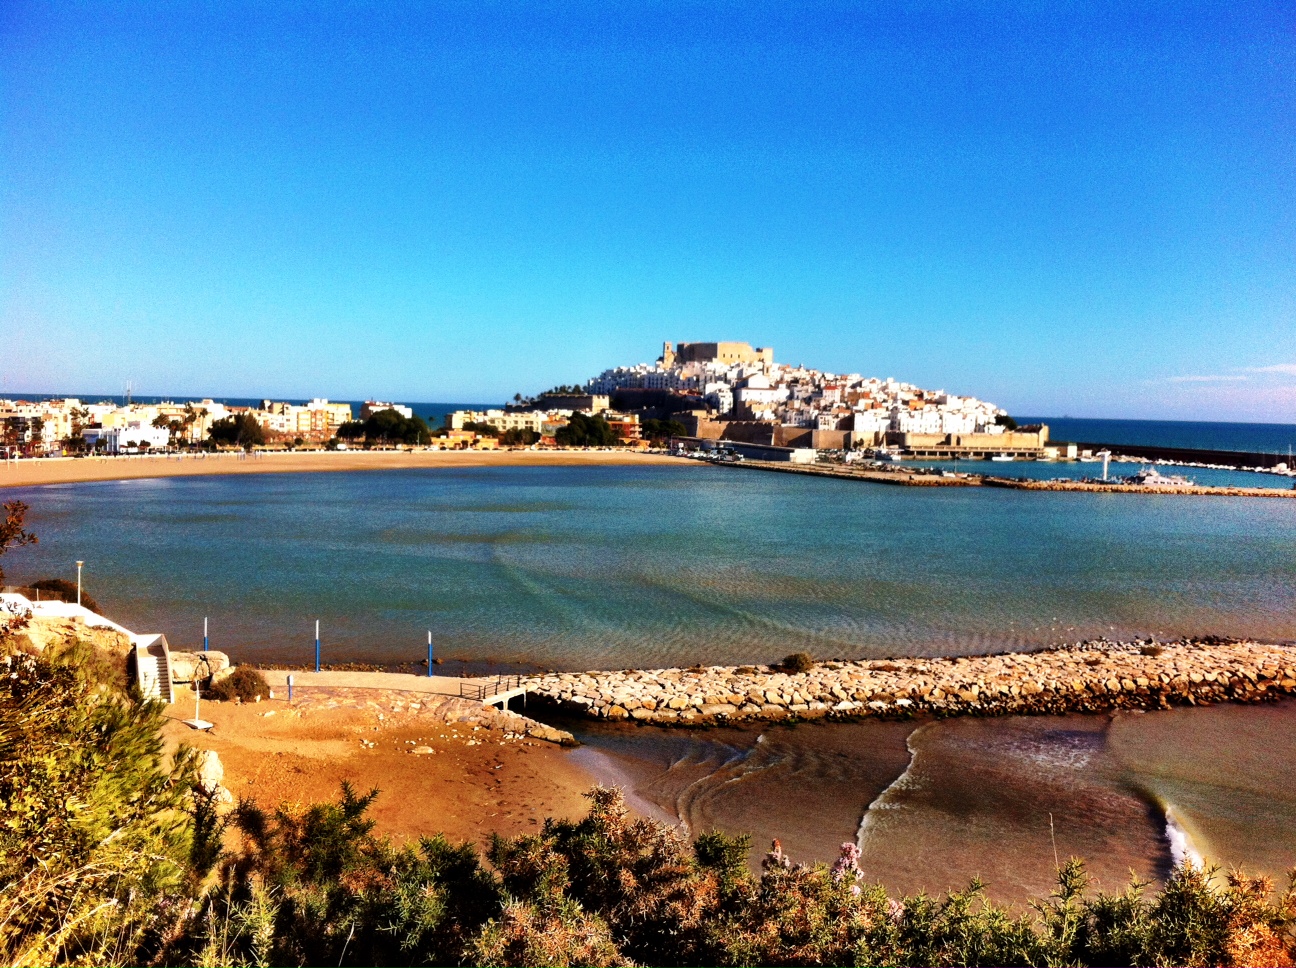 Cycling the Coastal Path from PeÃ±iscola to Alcossebre